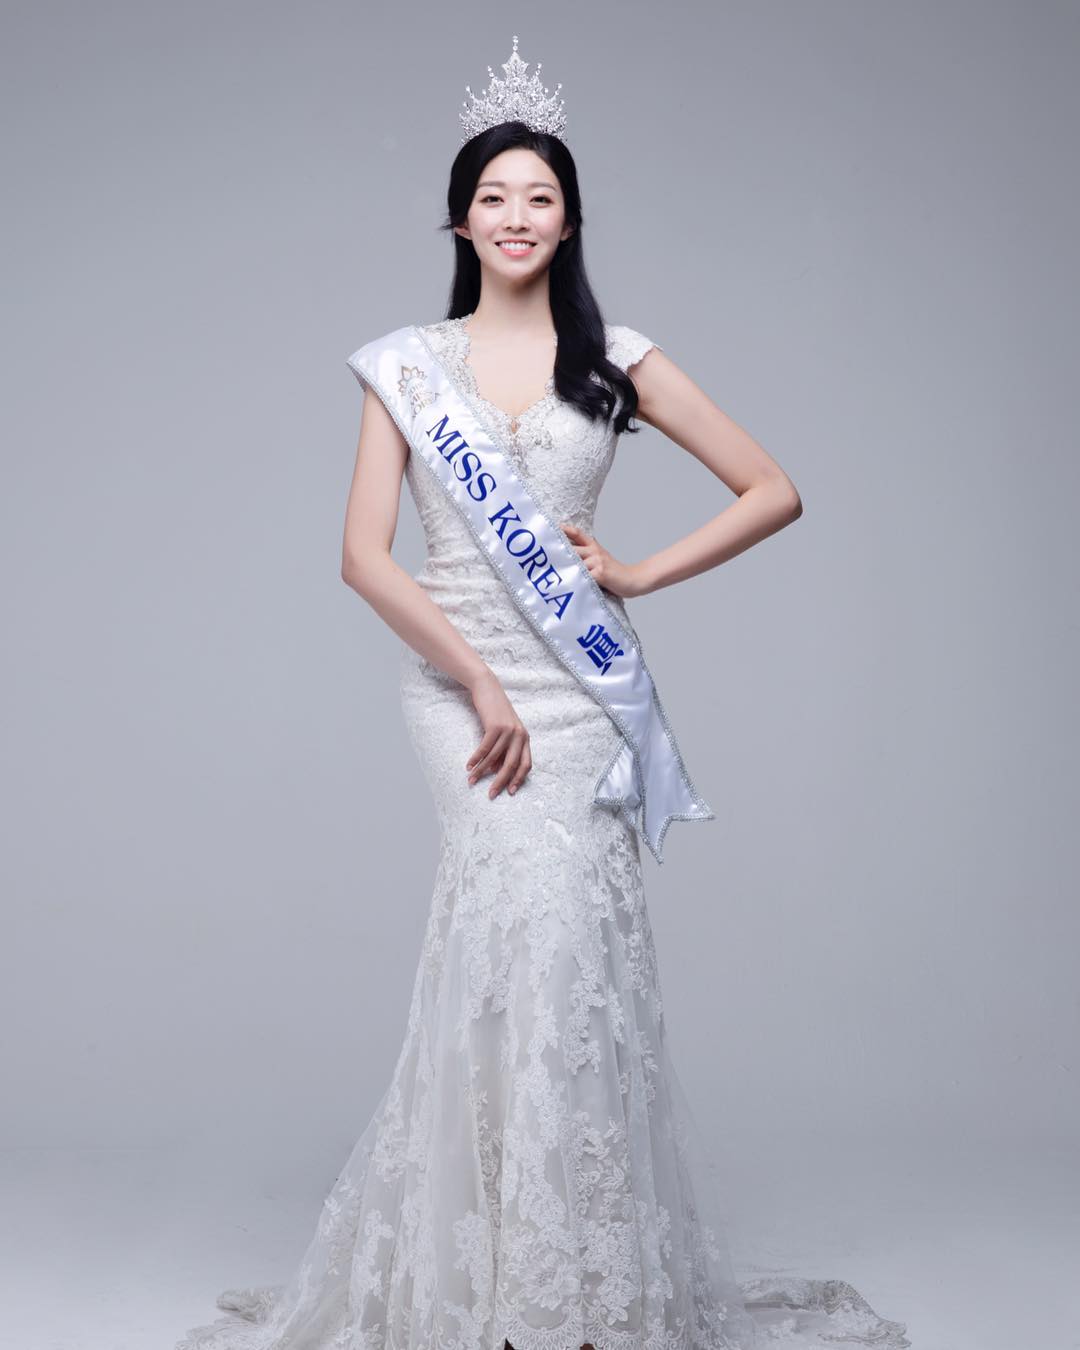 Miss Korea 2018 Reveals About The Time When She Was Criticized Because Of Her Weight